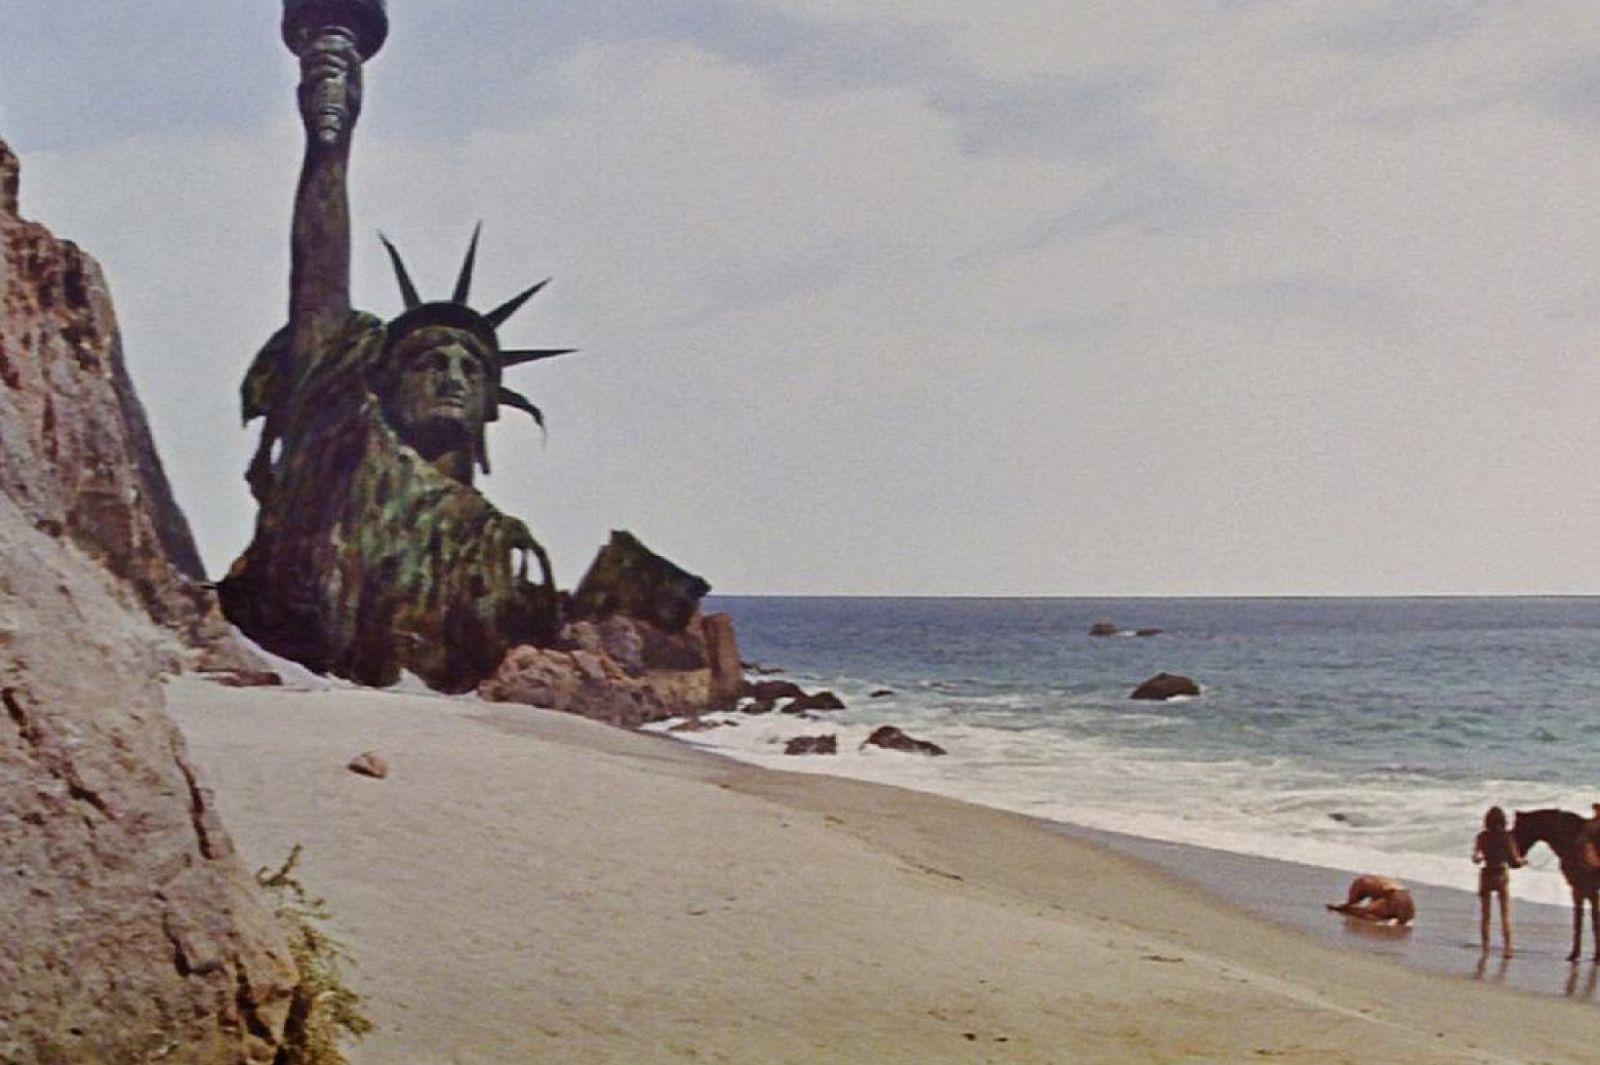 Planet of the apes ending